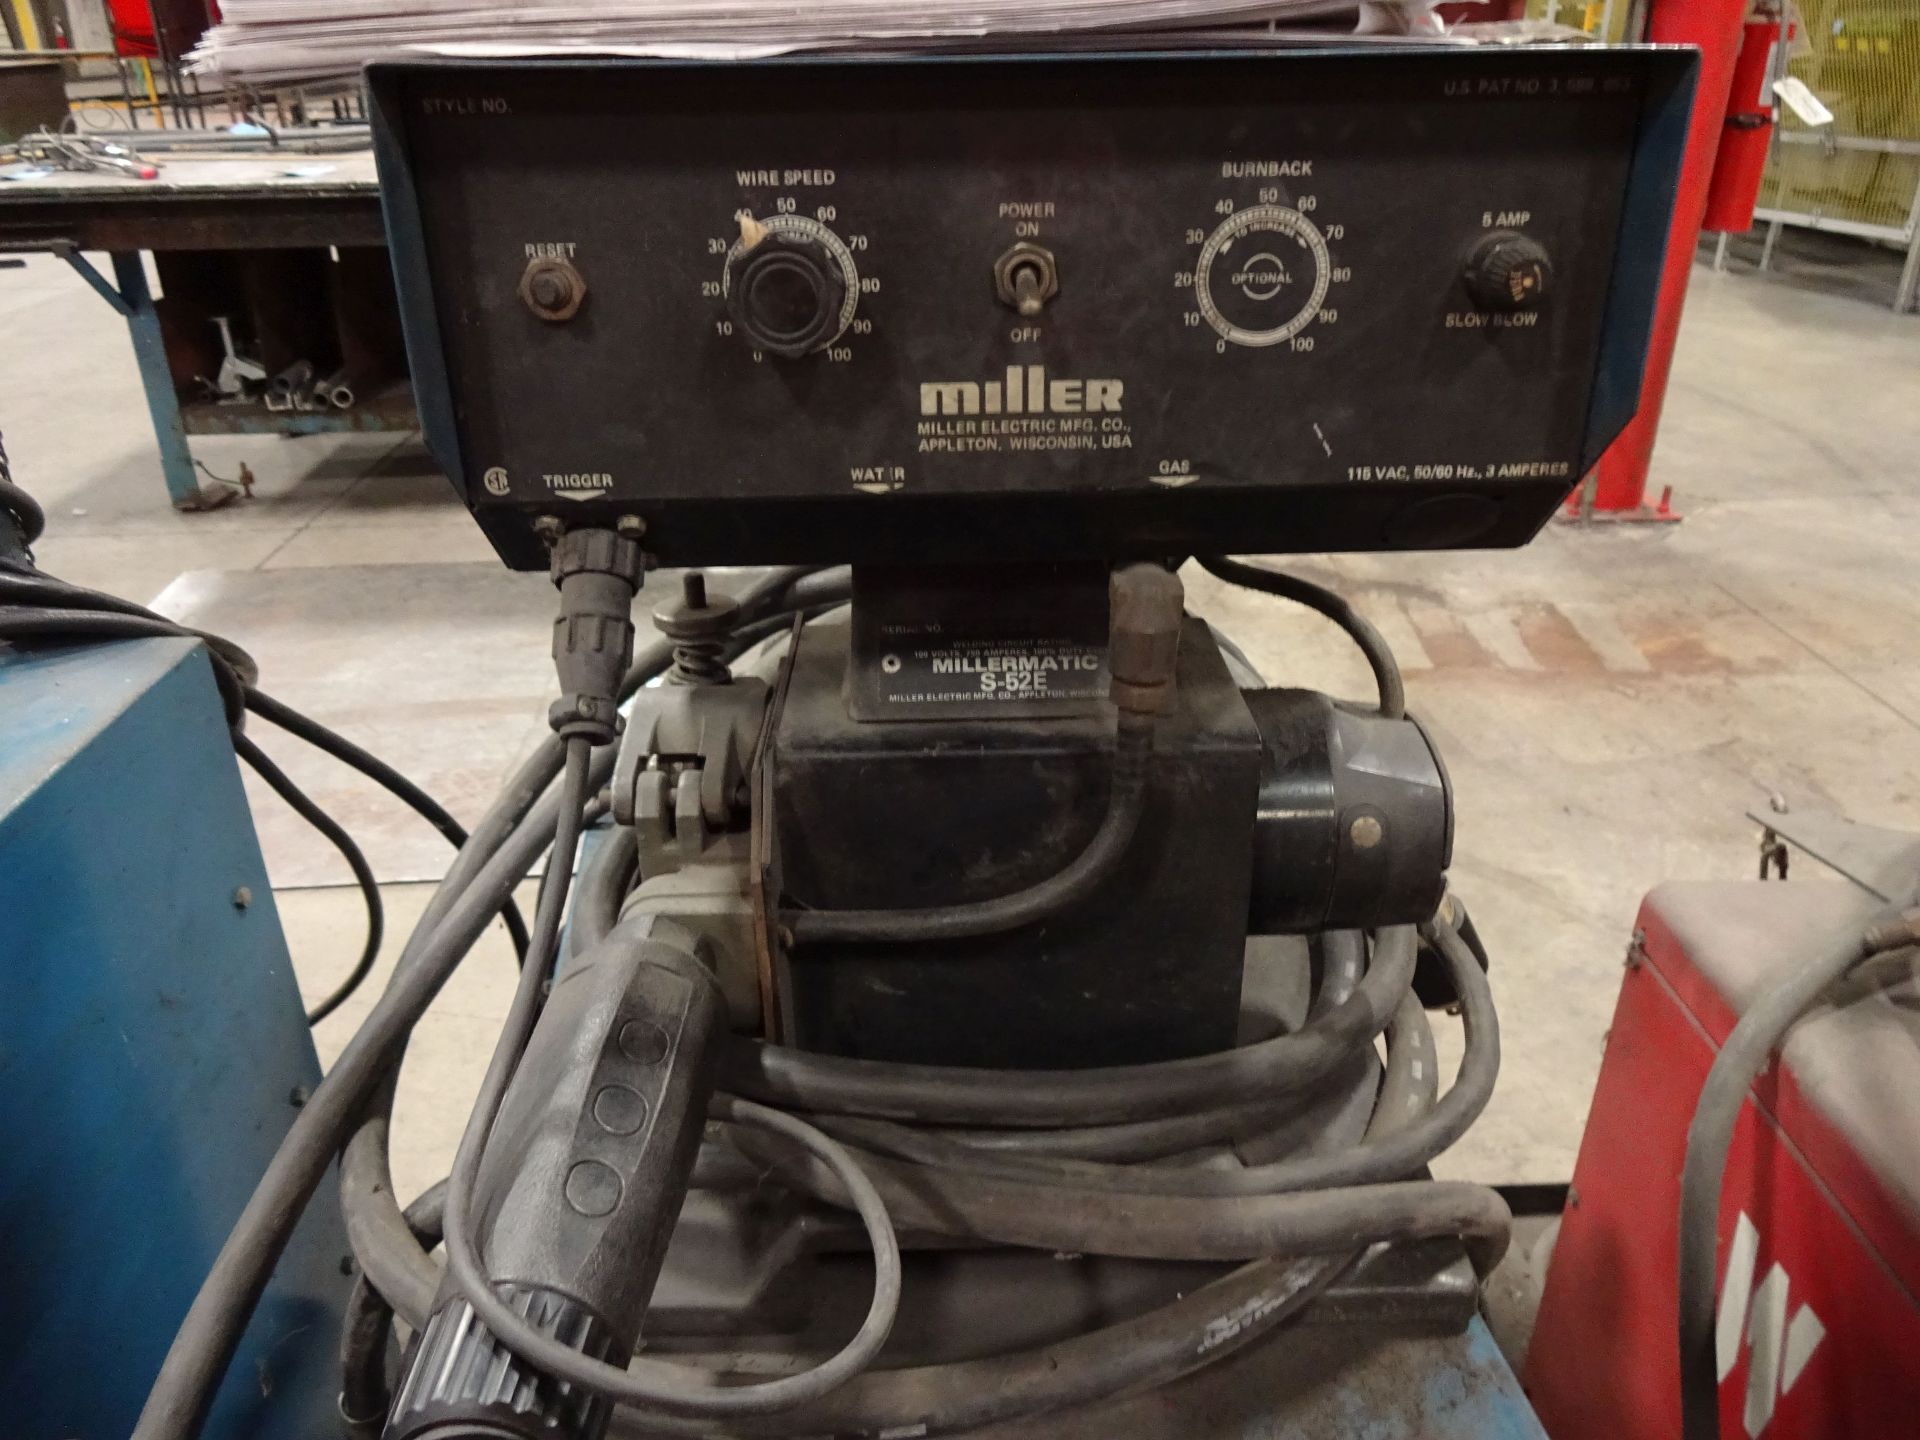 200 AMP MILLER CP200 WELDER; S/N JD668873 WITH MILLER MILLERMATIC S-52E WIRE FEEDER - Image 2 of 4